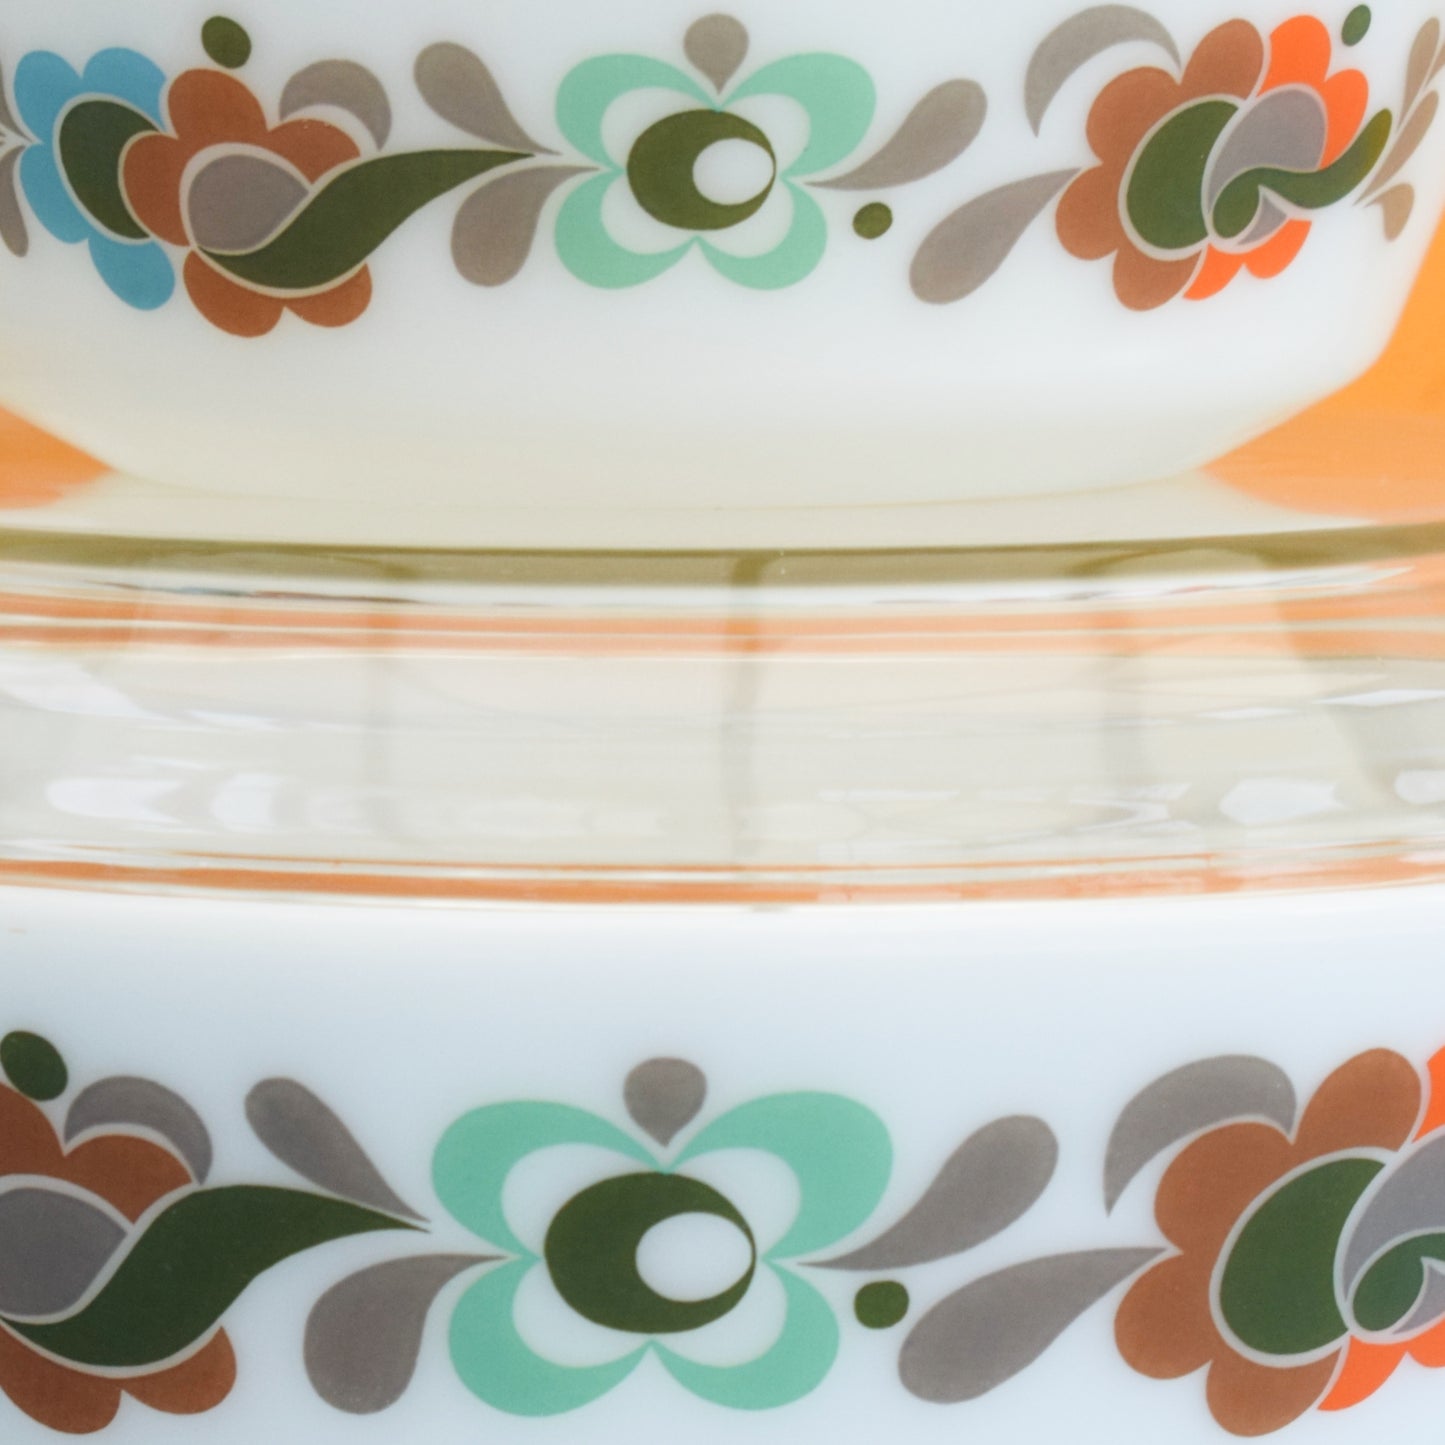 Vintage 1960s Pyrex Casseroles - Carnaby Tempo